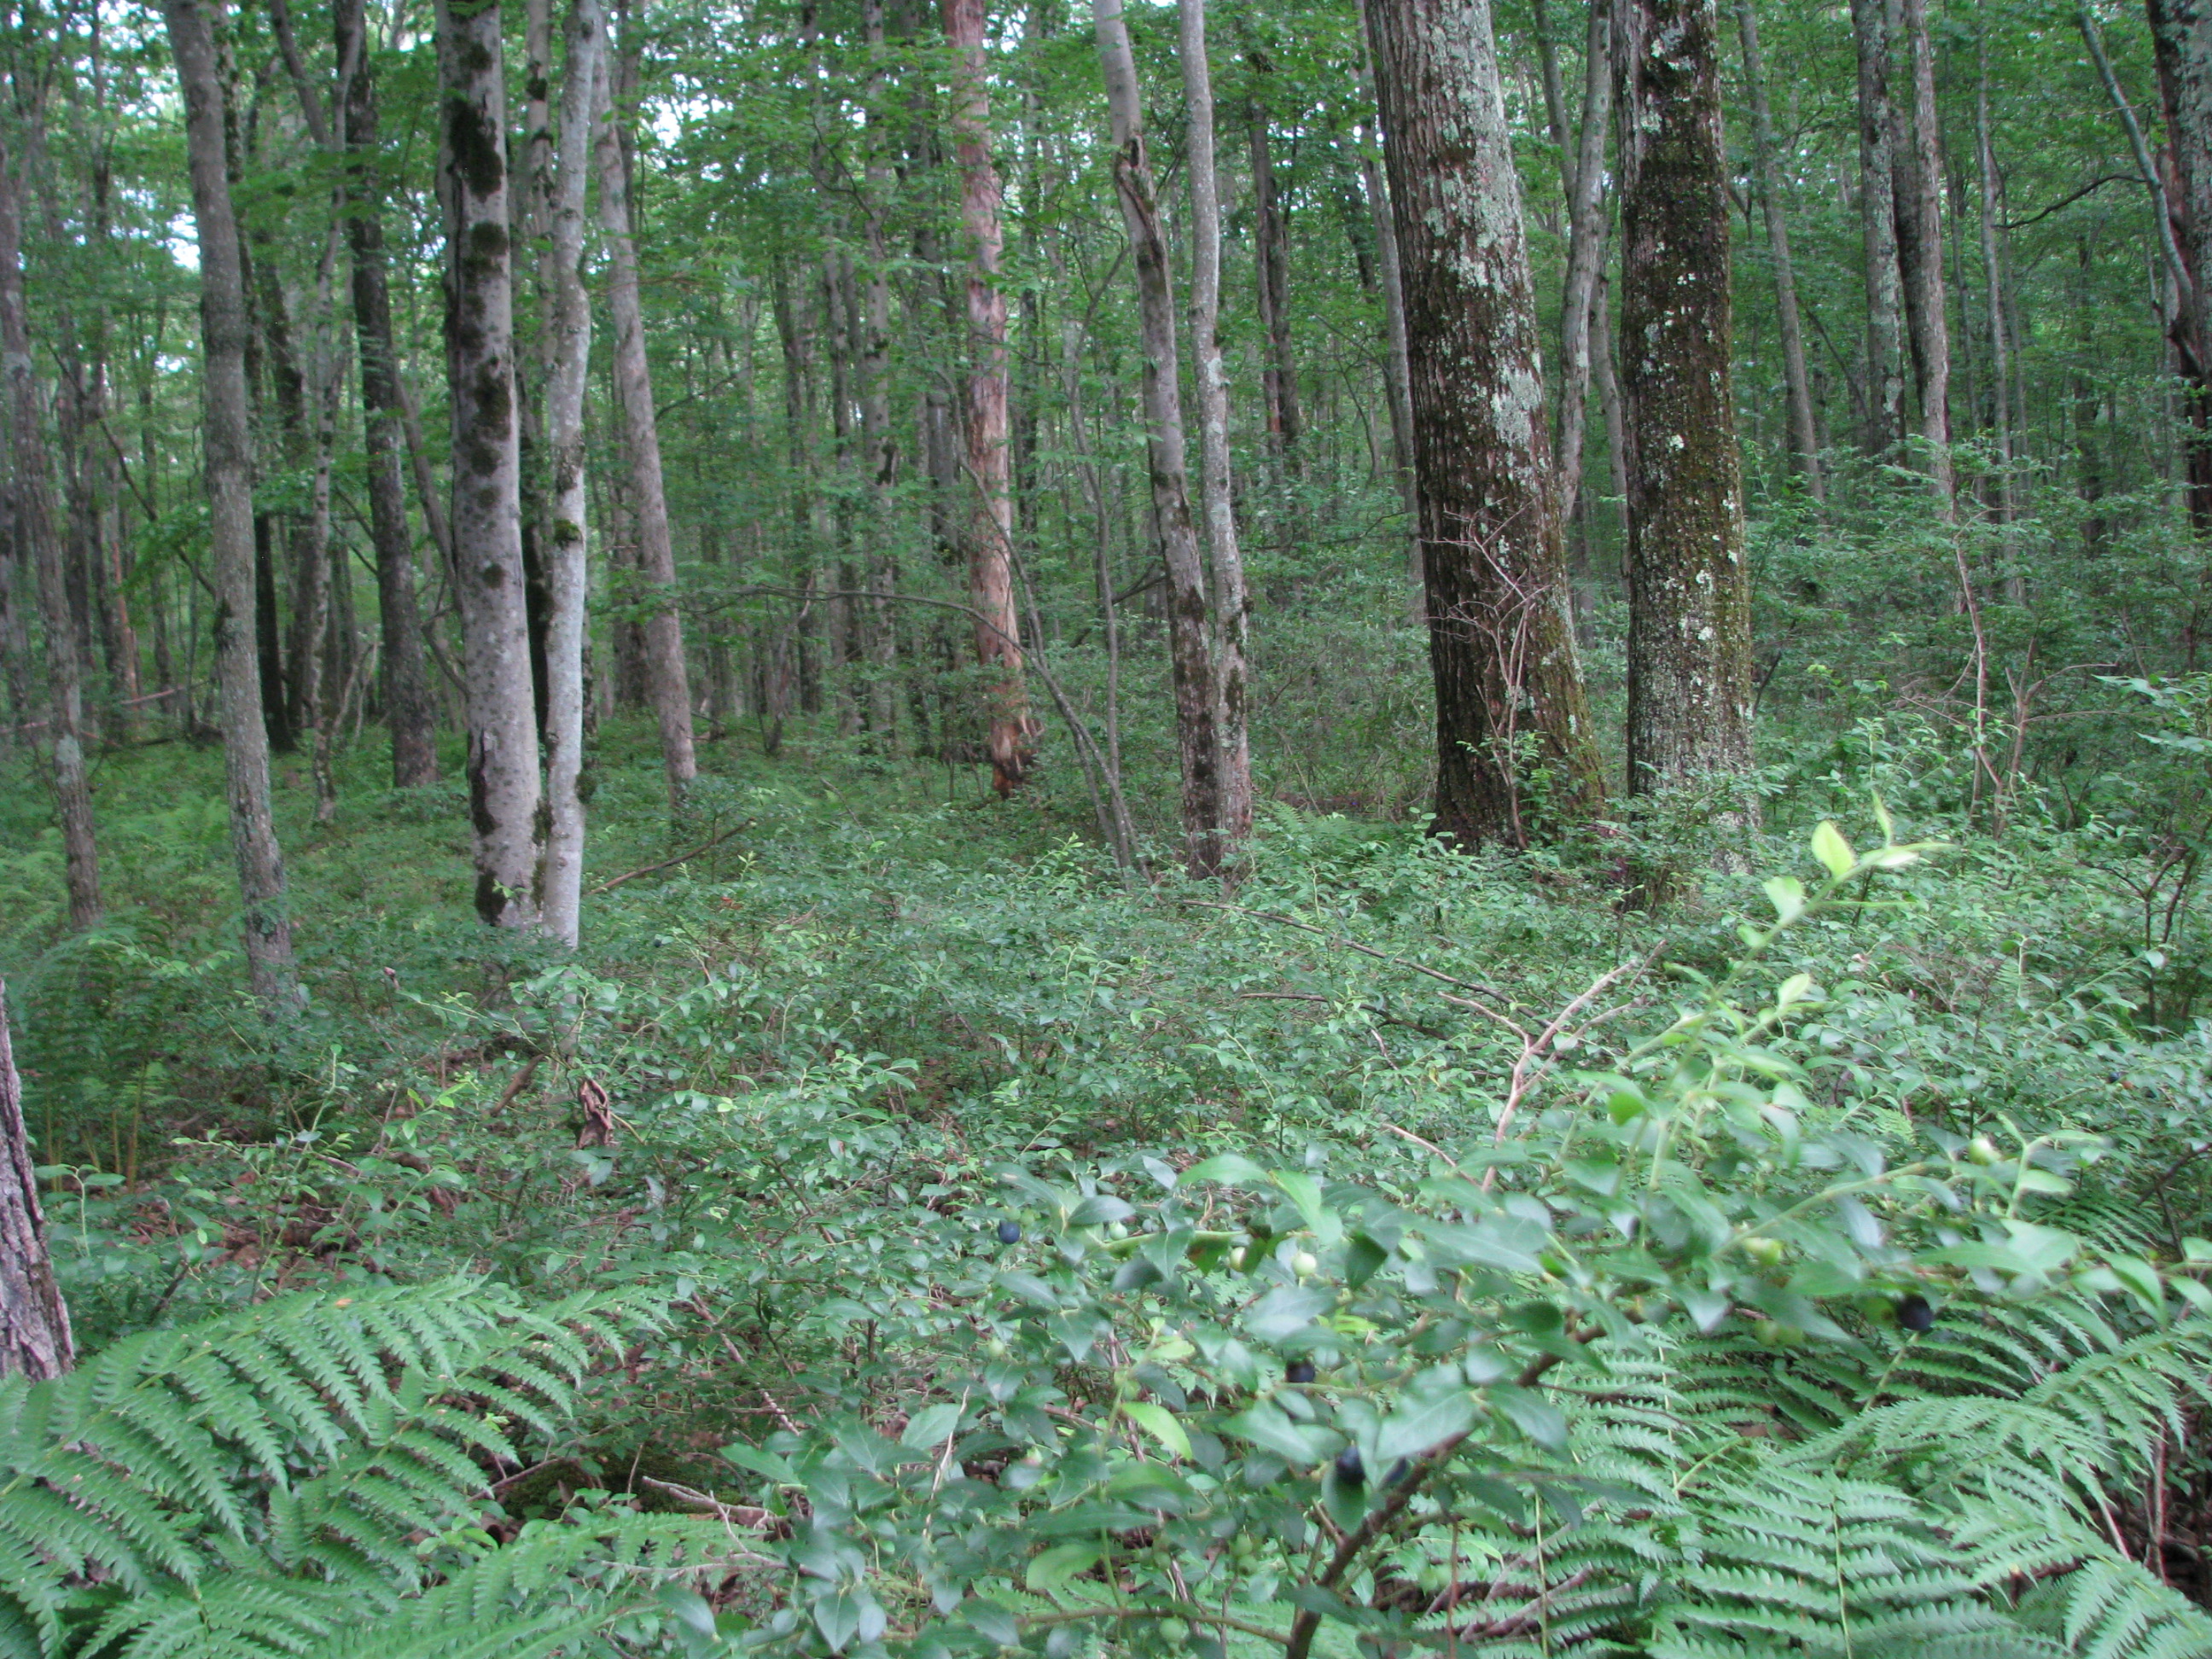 Ferns and several tall and thin trees grown in a forest.